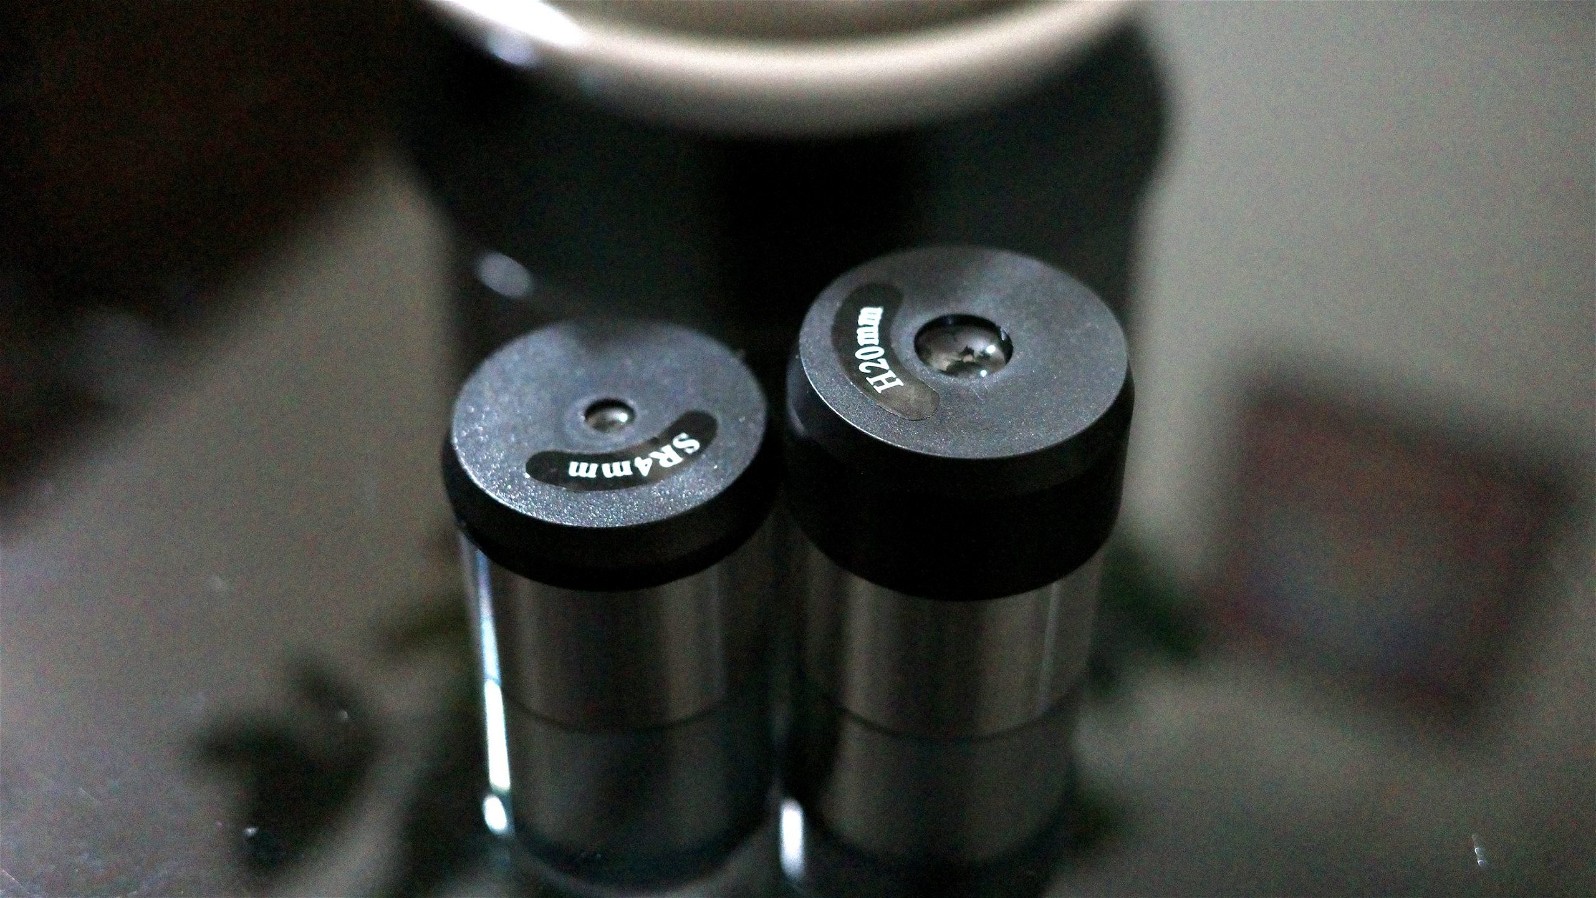 Eyepieces that come with the Celestron Firstscope